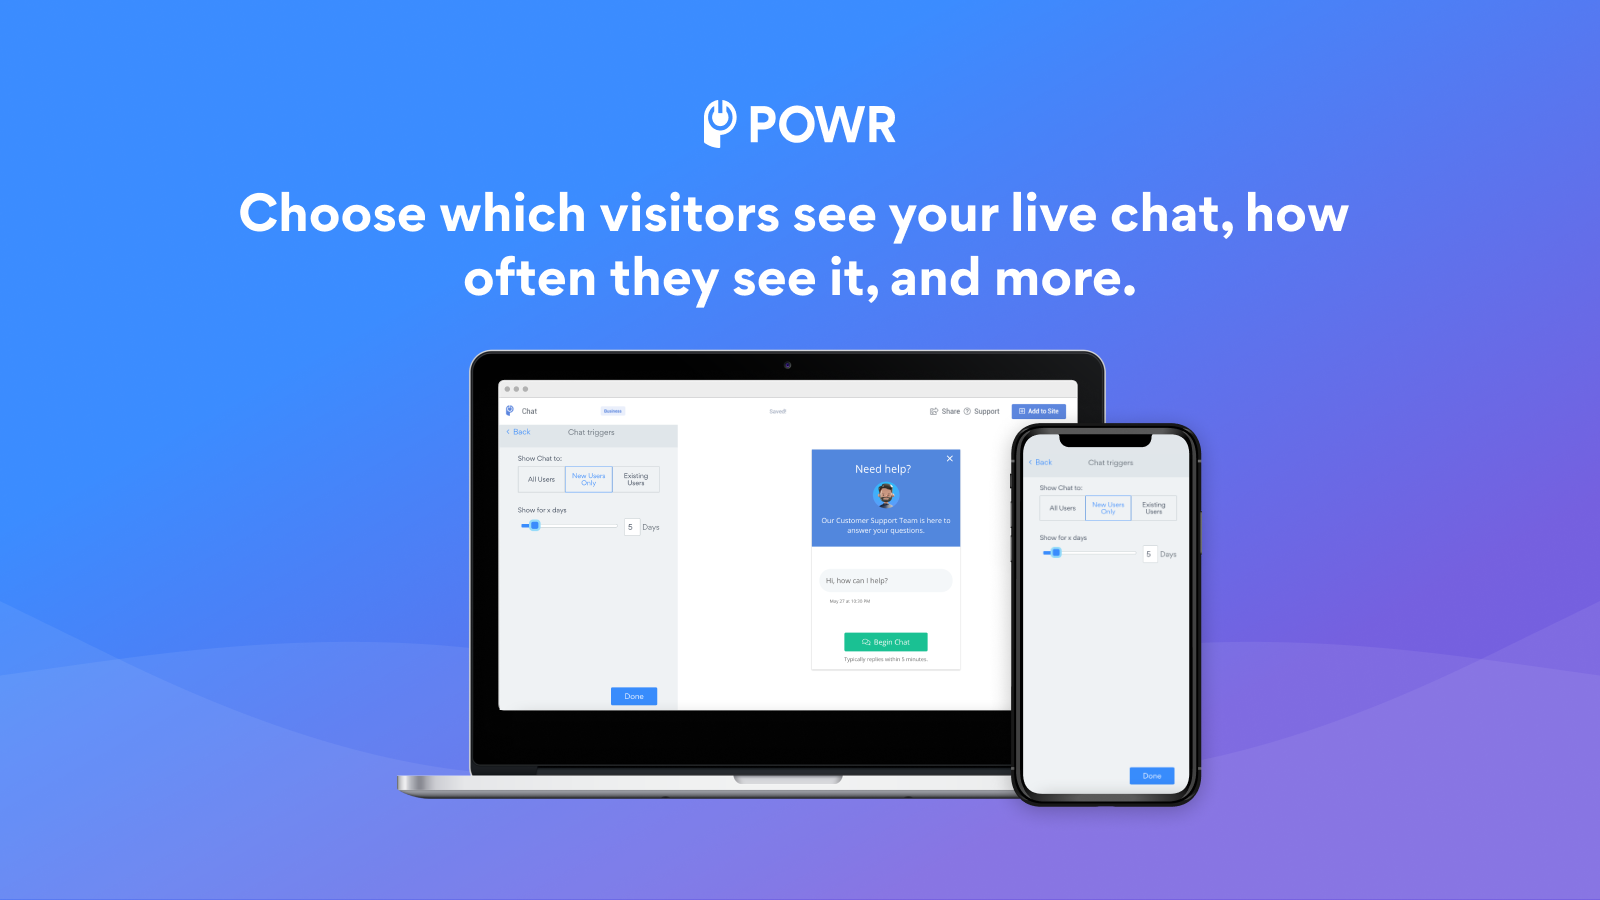 Choose which visitors see your live chat, how often, and more.